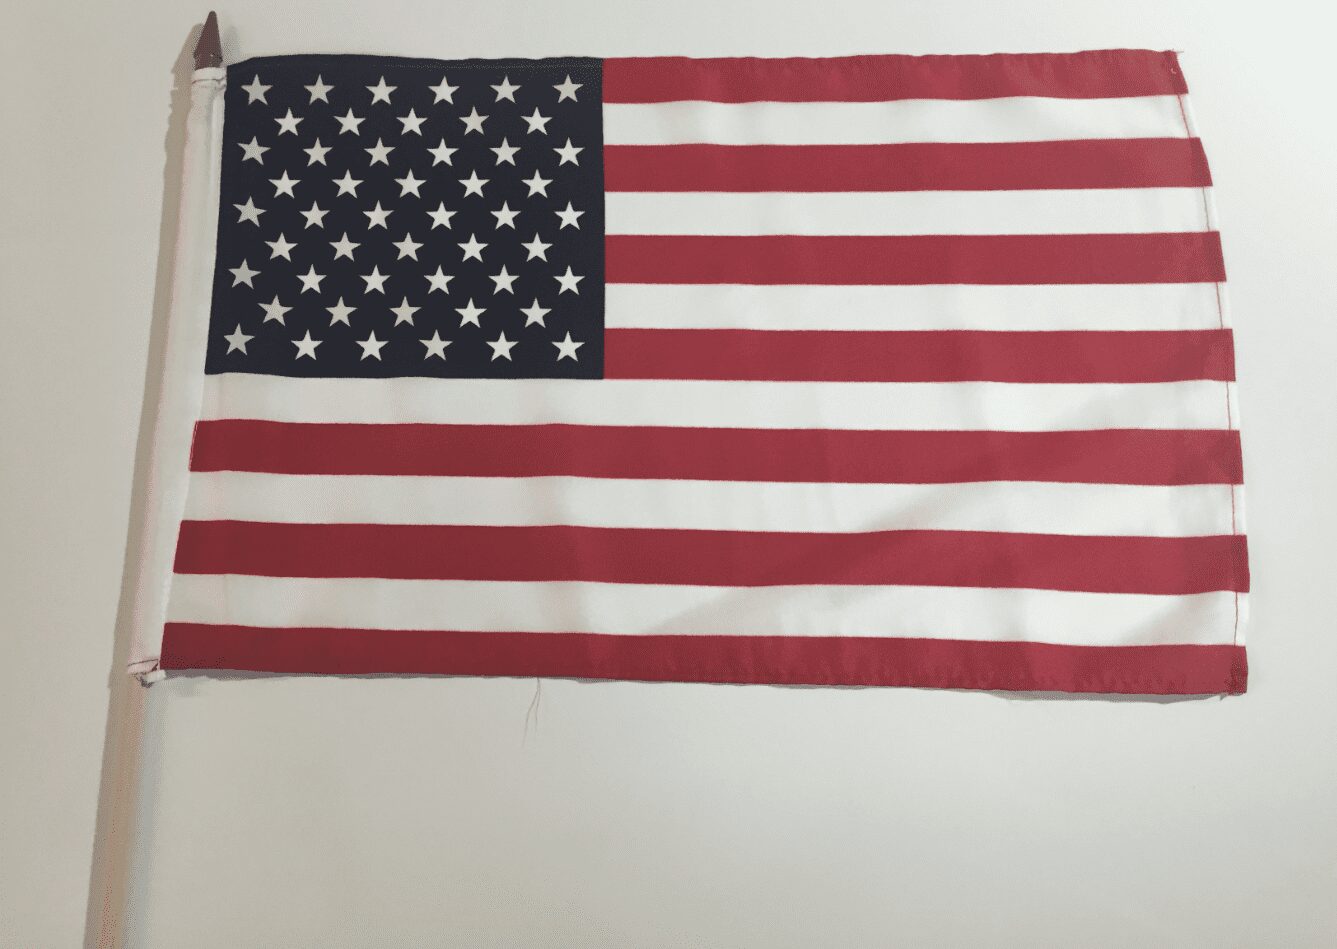 vendor-unknown Flag USA, Missouri & Confederate 1st National 7-Star Flags, 12 x 18 Inch on a Stick